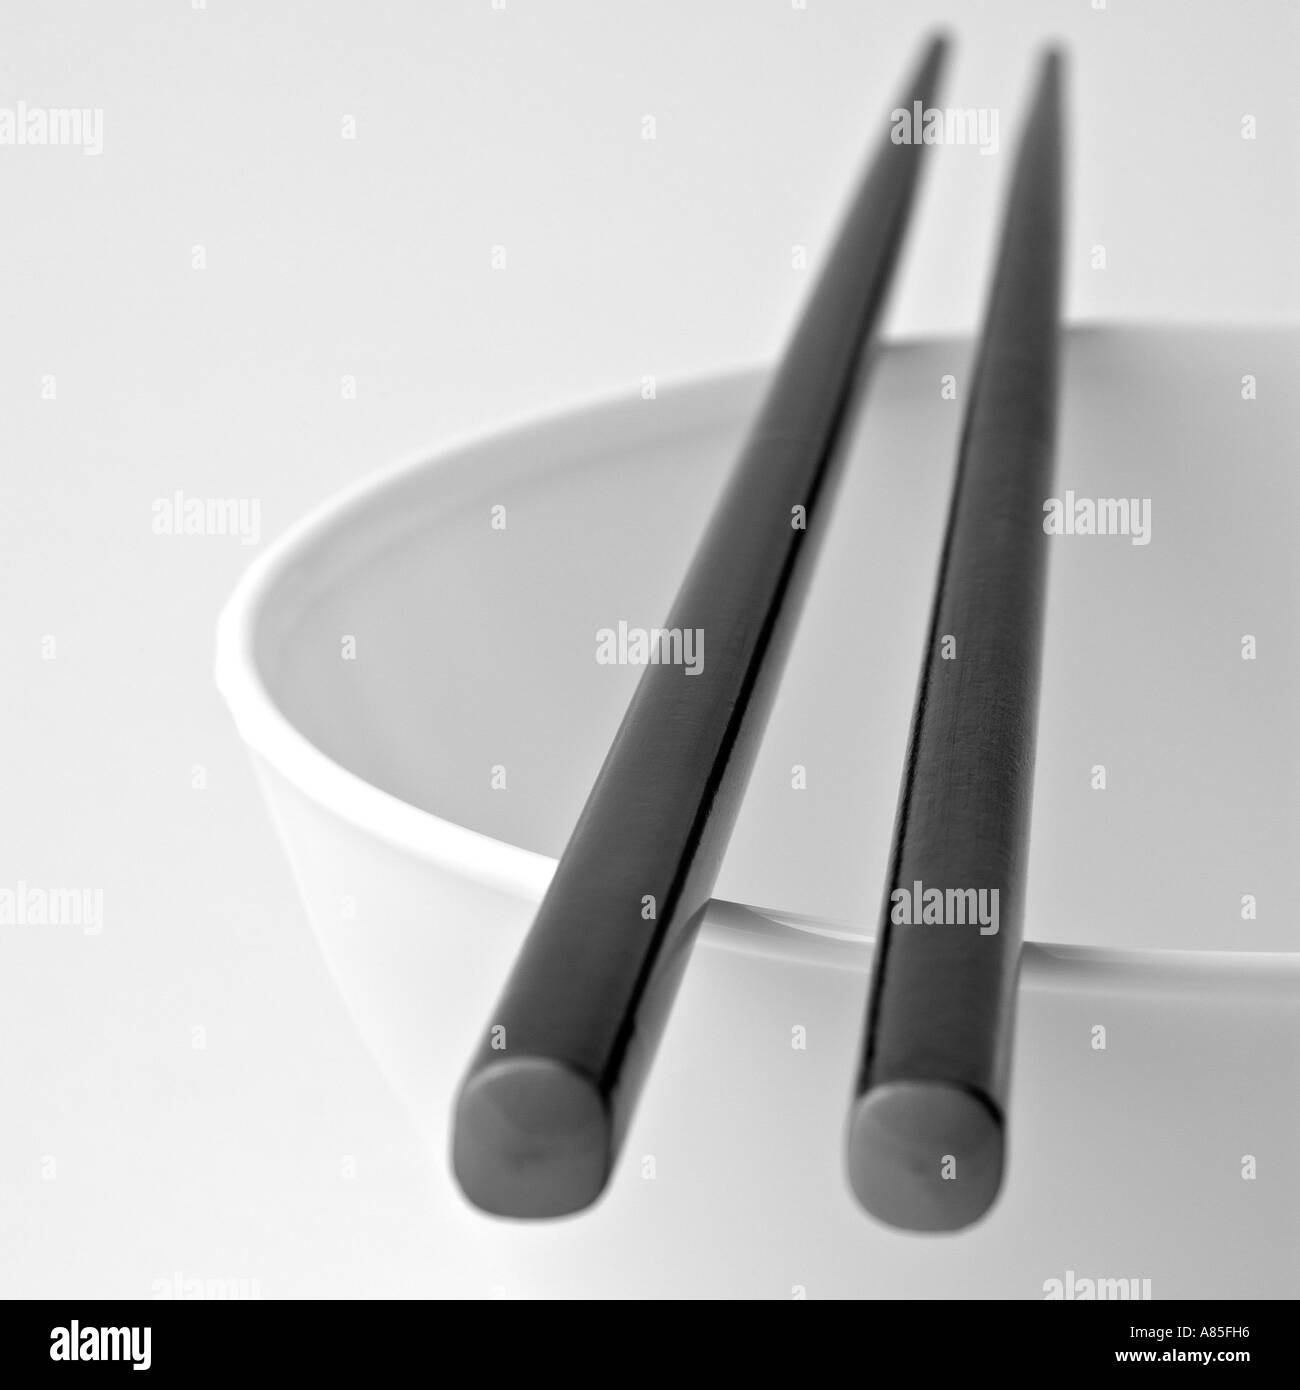 Abstract Of An Empty Rice Bowl With Chopsticks Stock Photo